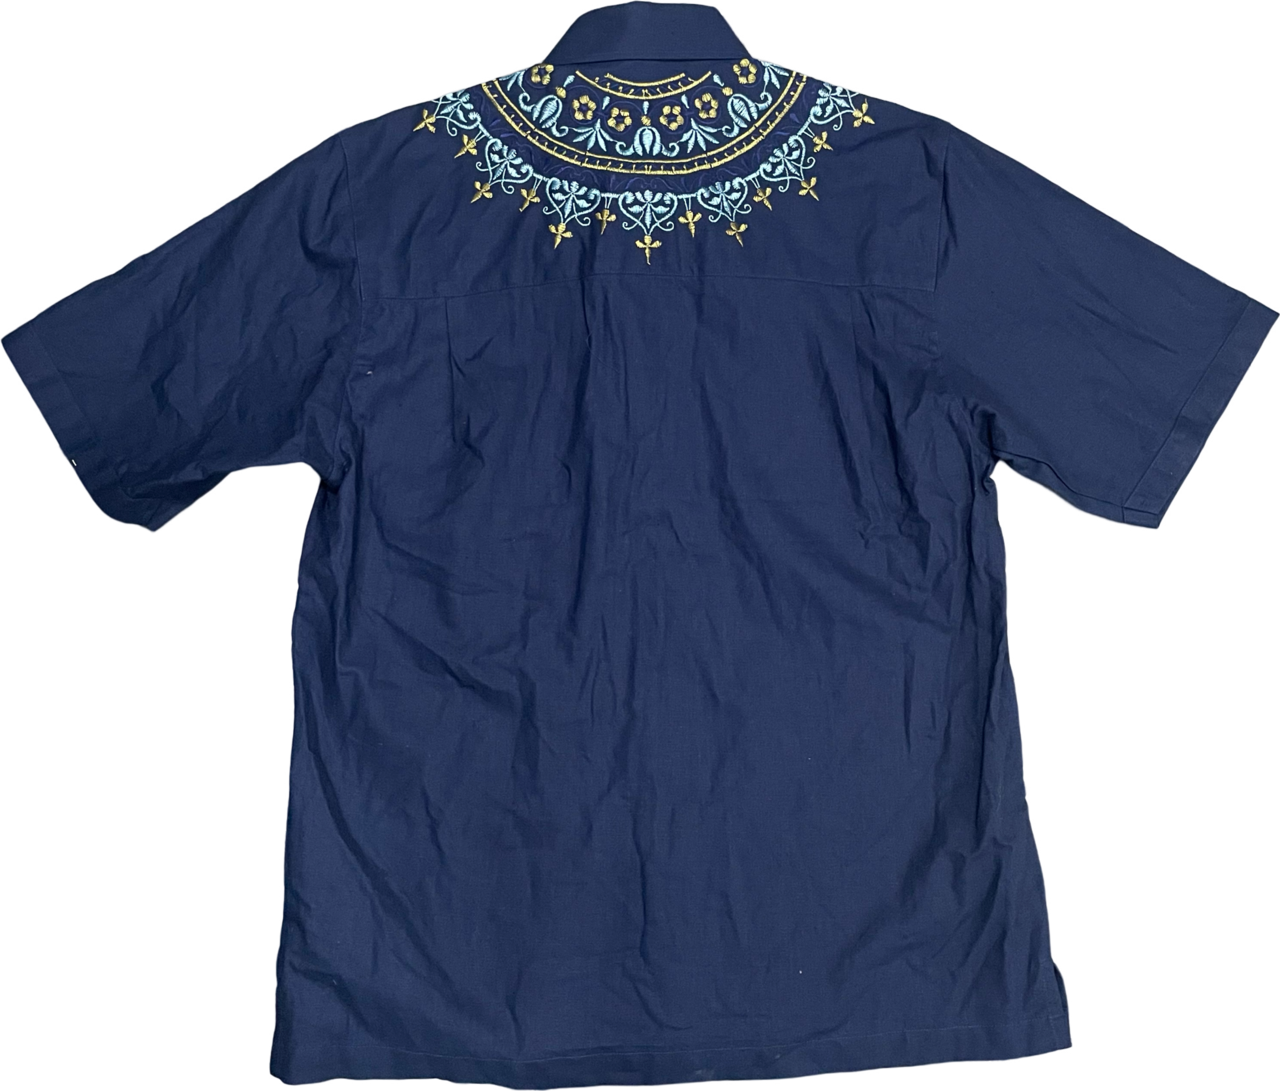 SPECIAL EMBROIDERY DESIGN SHIRTS